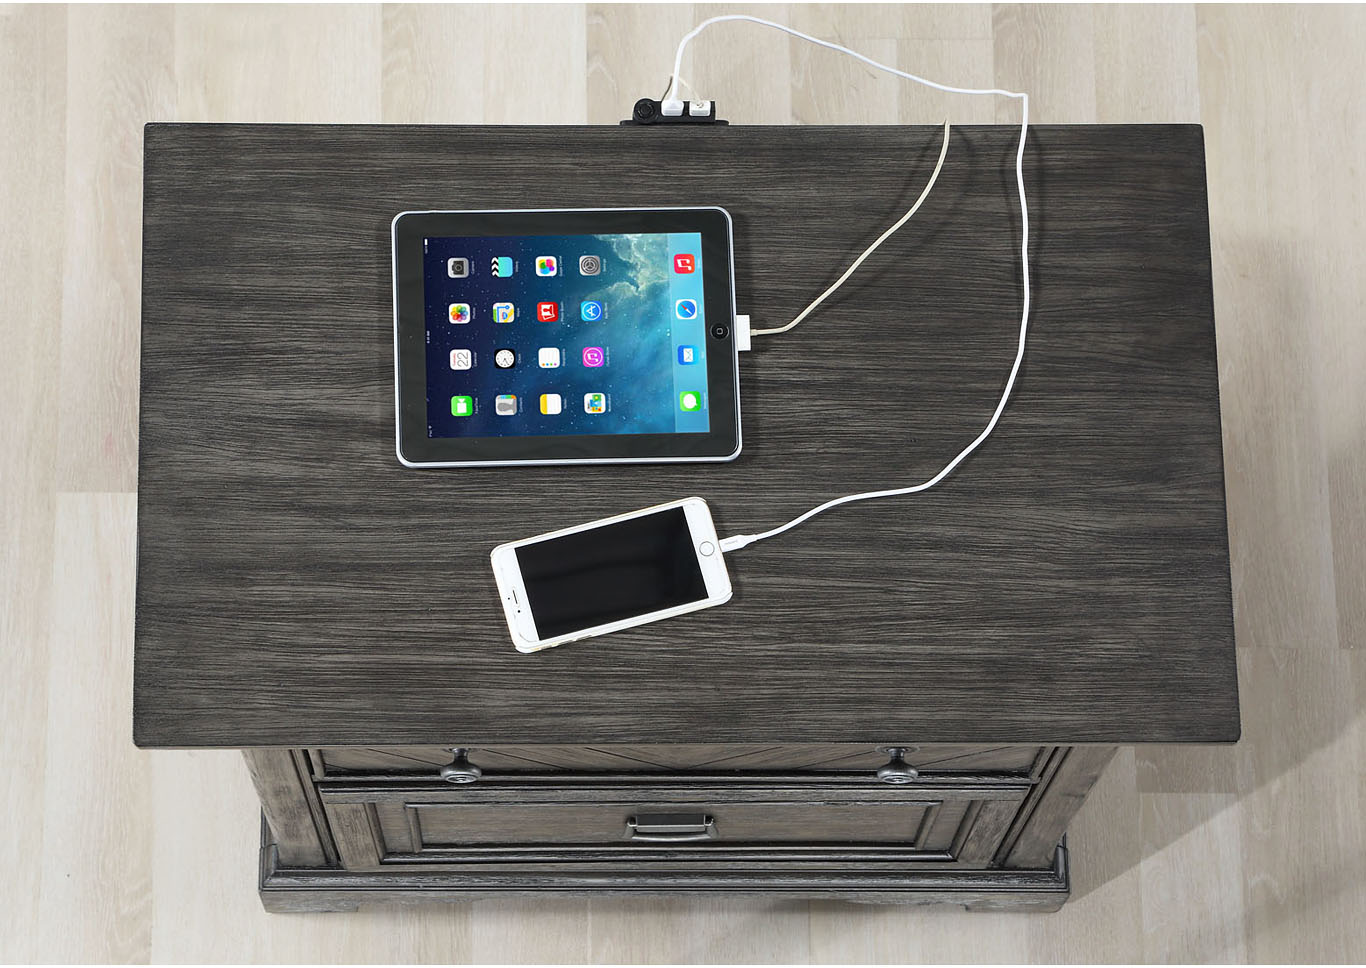 Lanett 2 Drawer Nightstand with USB Charging Station,Instore